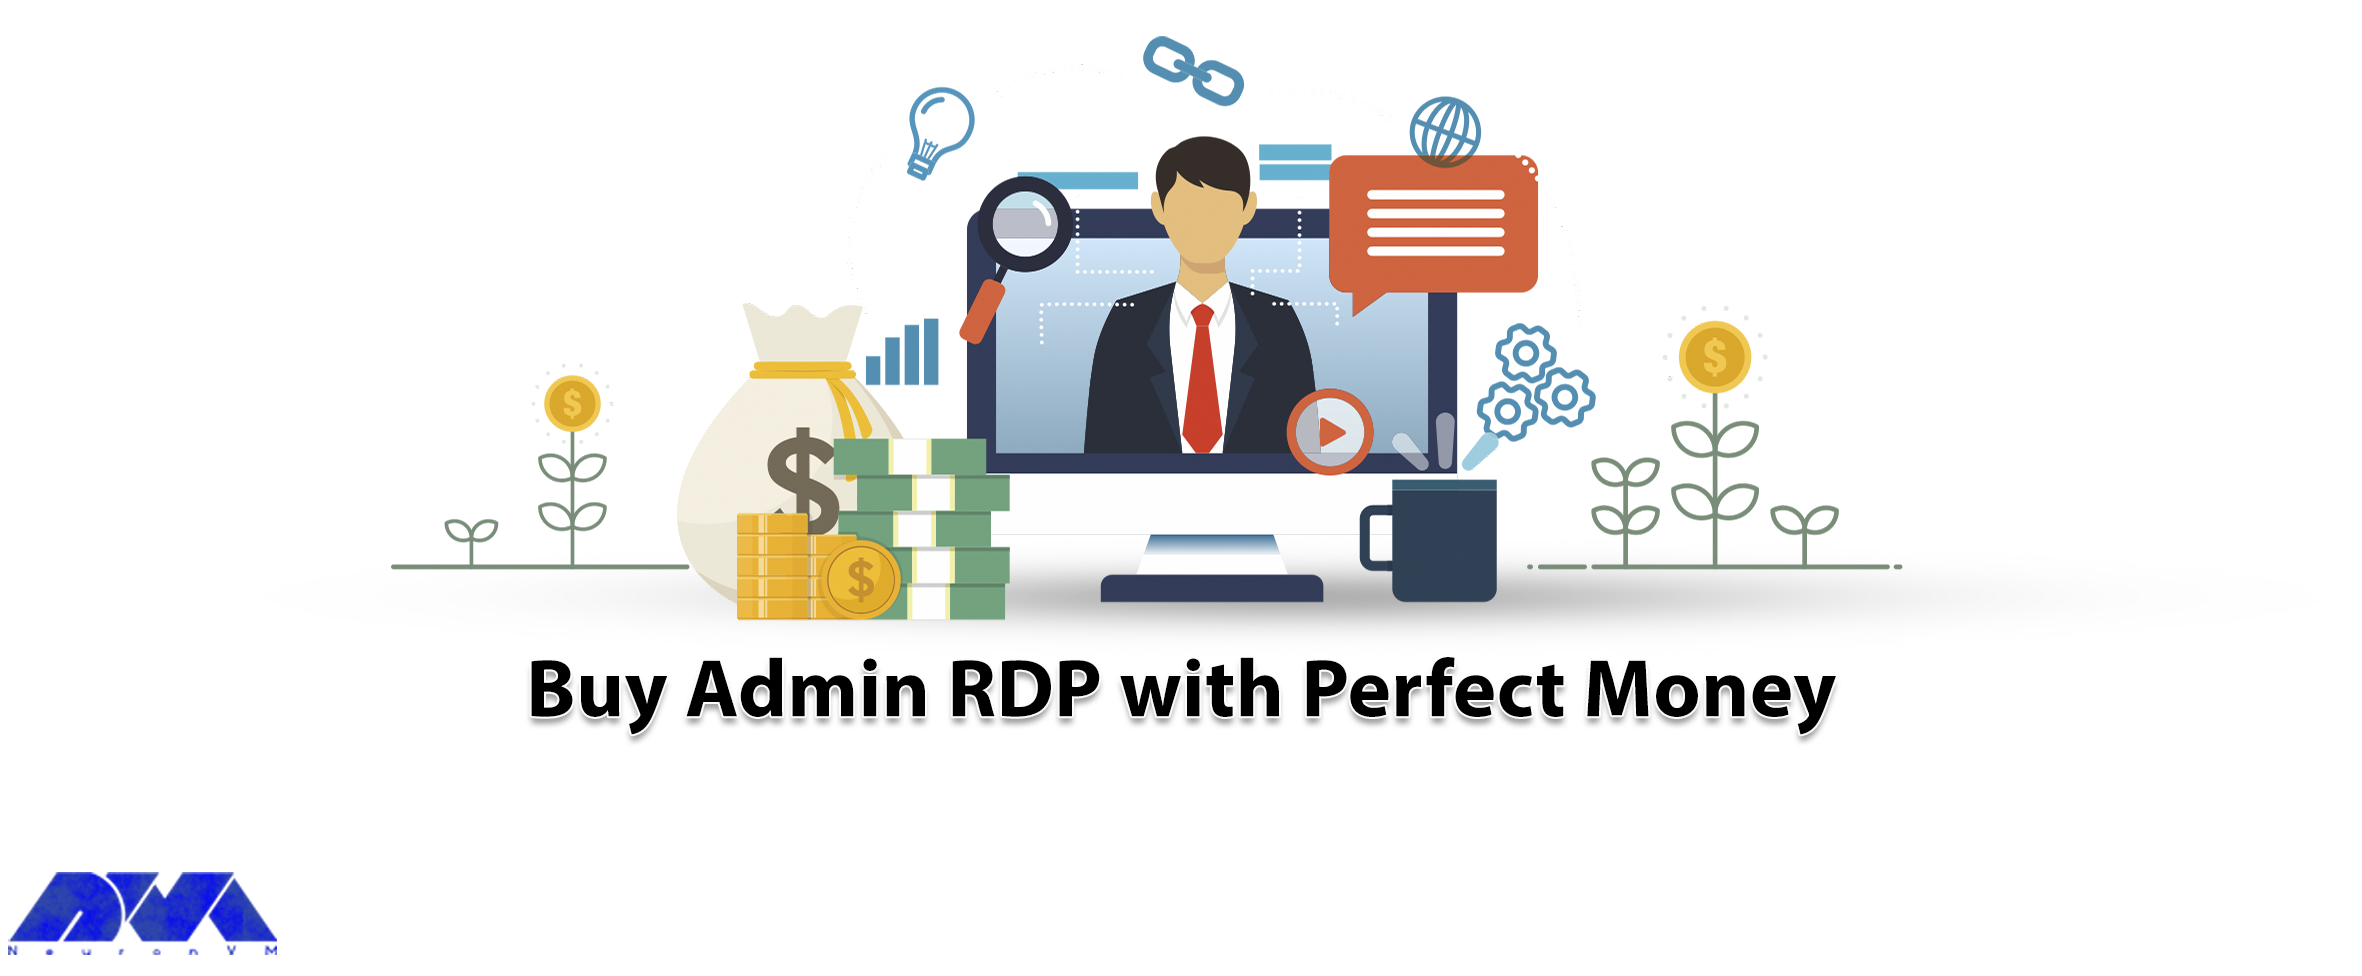 How to Buy Admin RDP with Perfect Money - NeuronVM